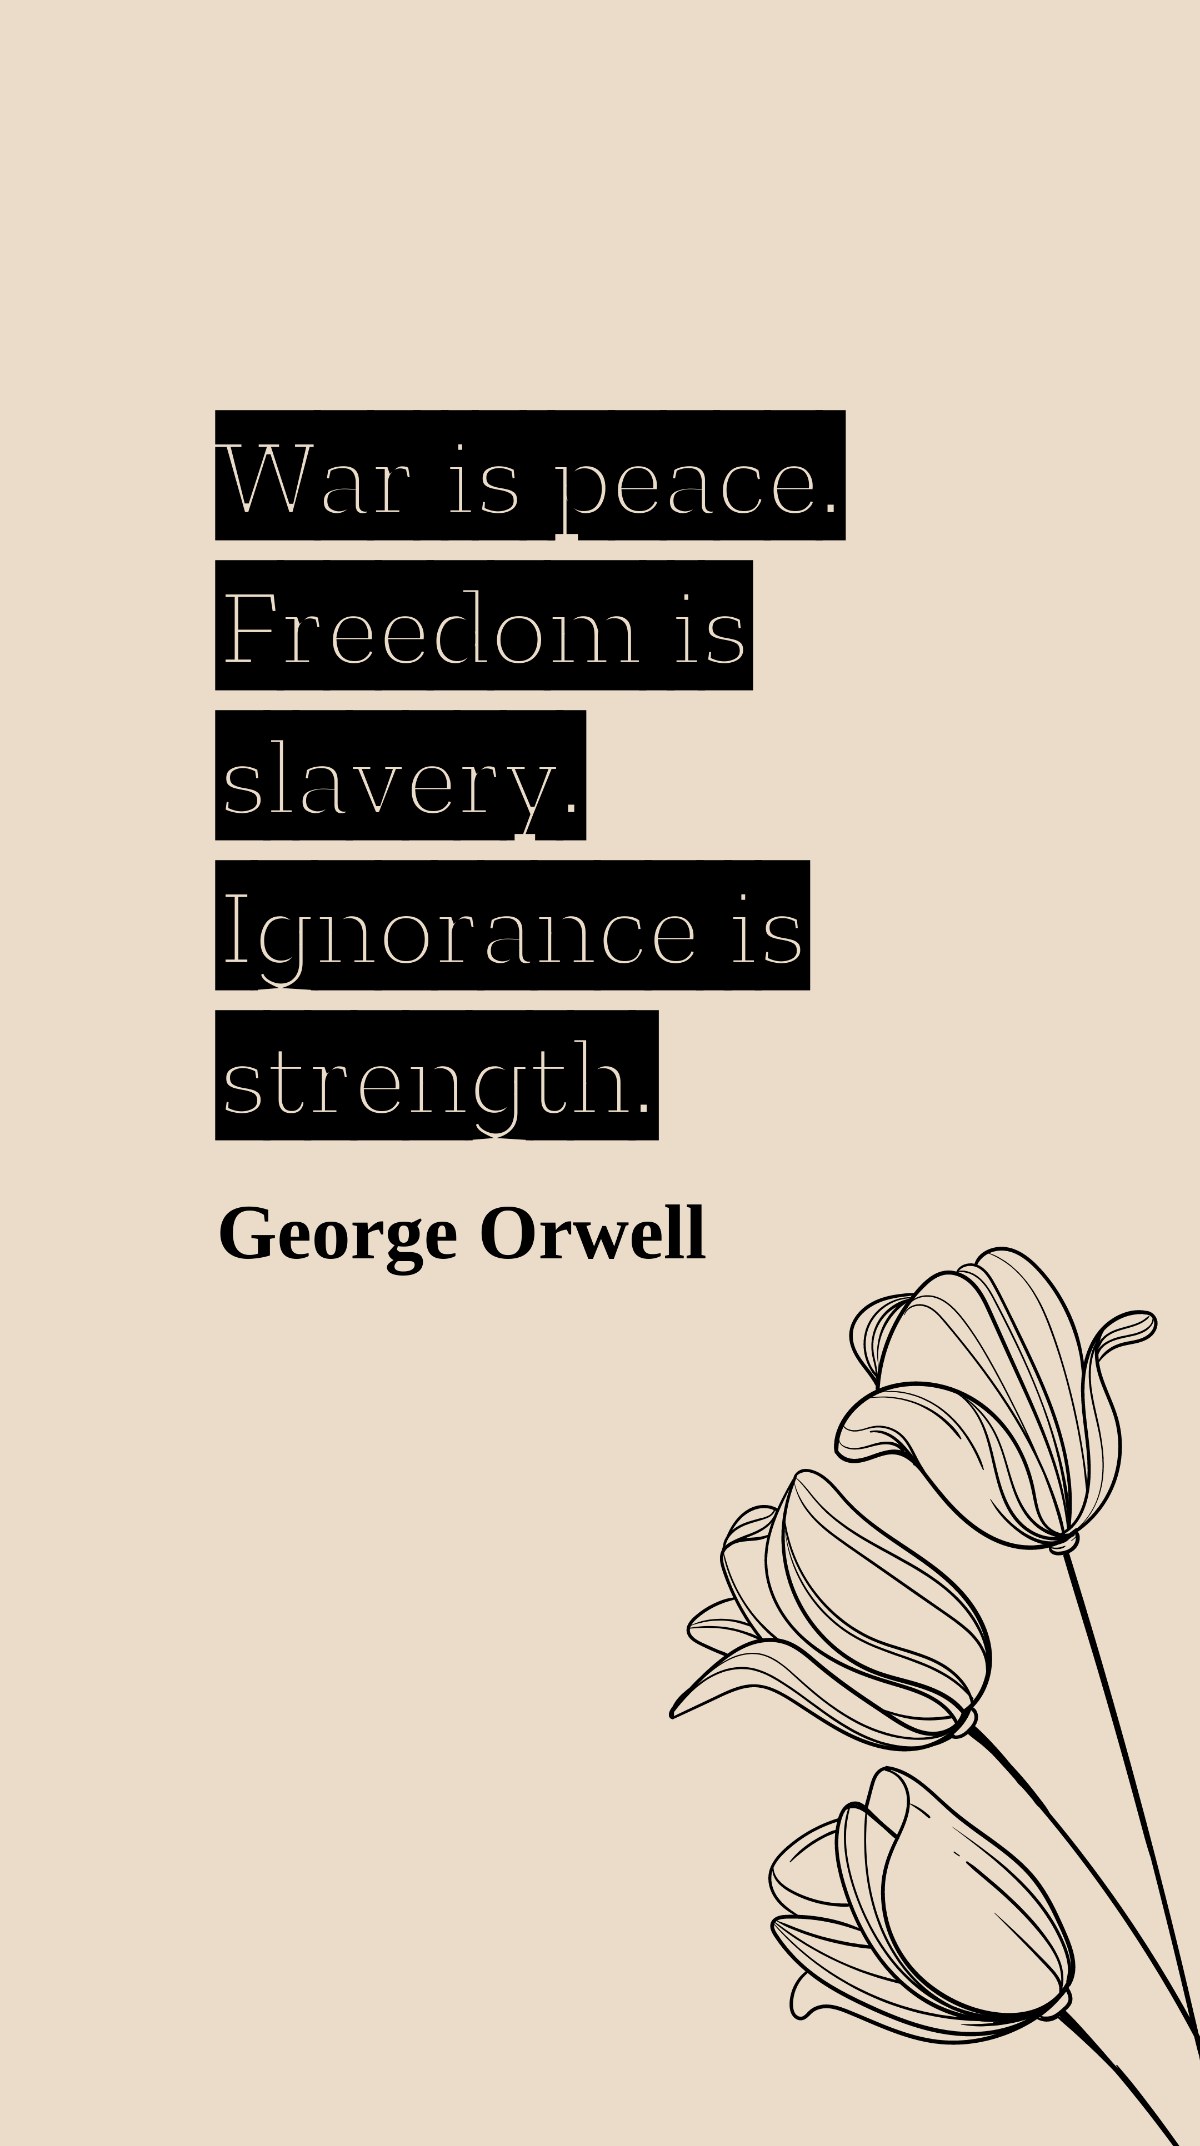 George Orwell - War is peace. Freedom is slavery. Ignorance is strength. Template